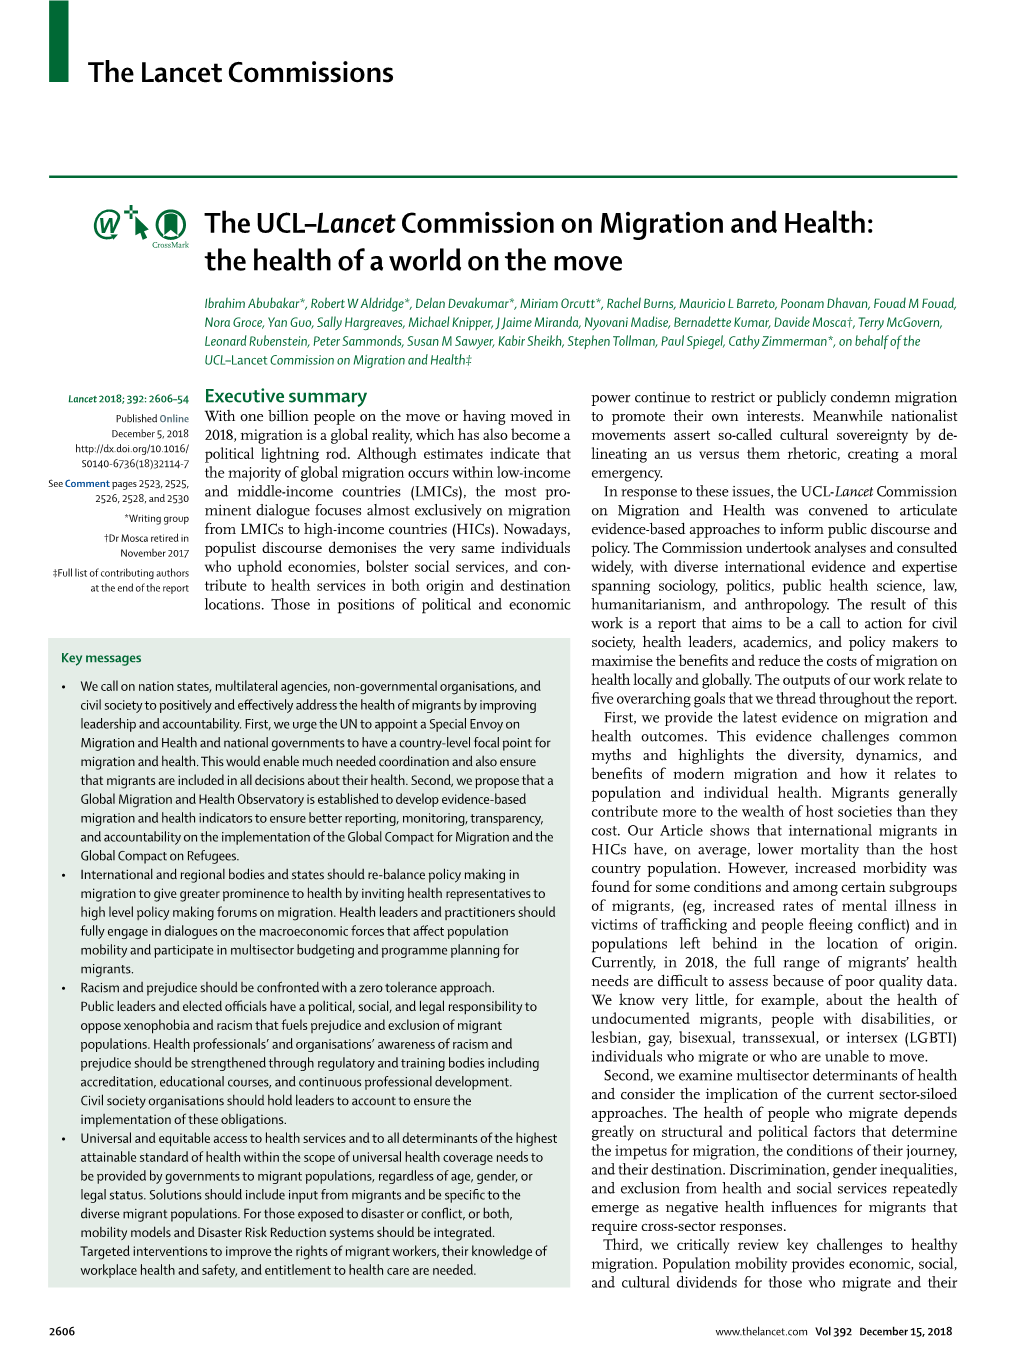 The UCL–Lancet Commission on Migration and Health: the Health of a World on the Move